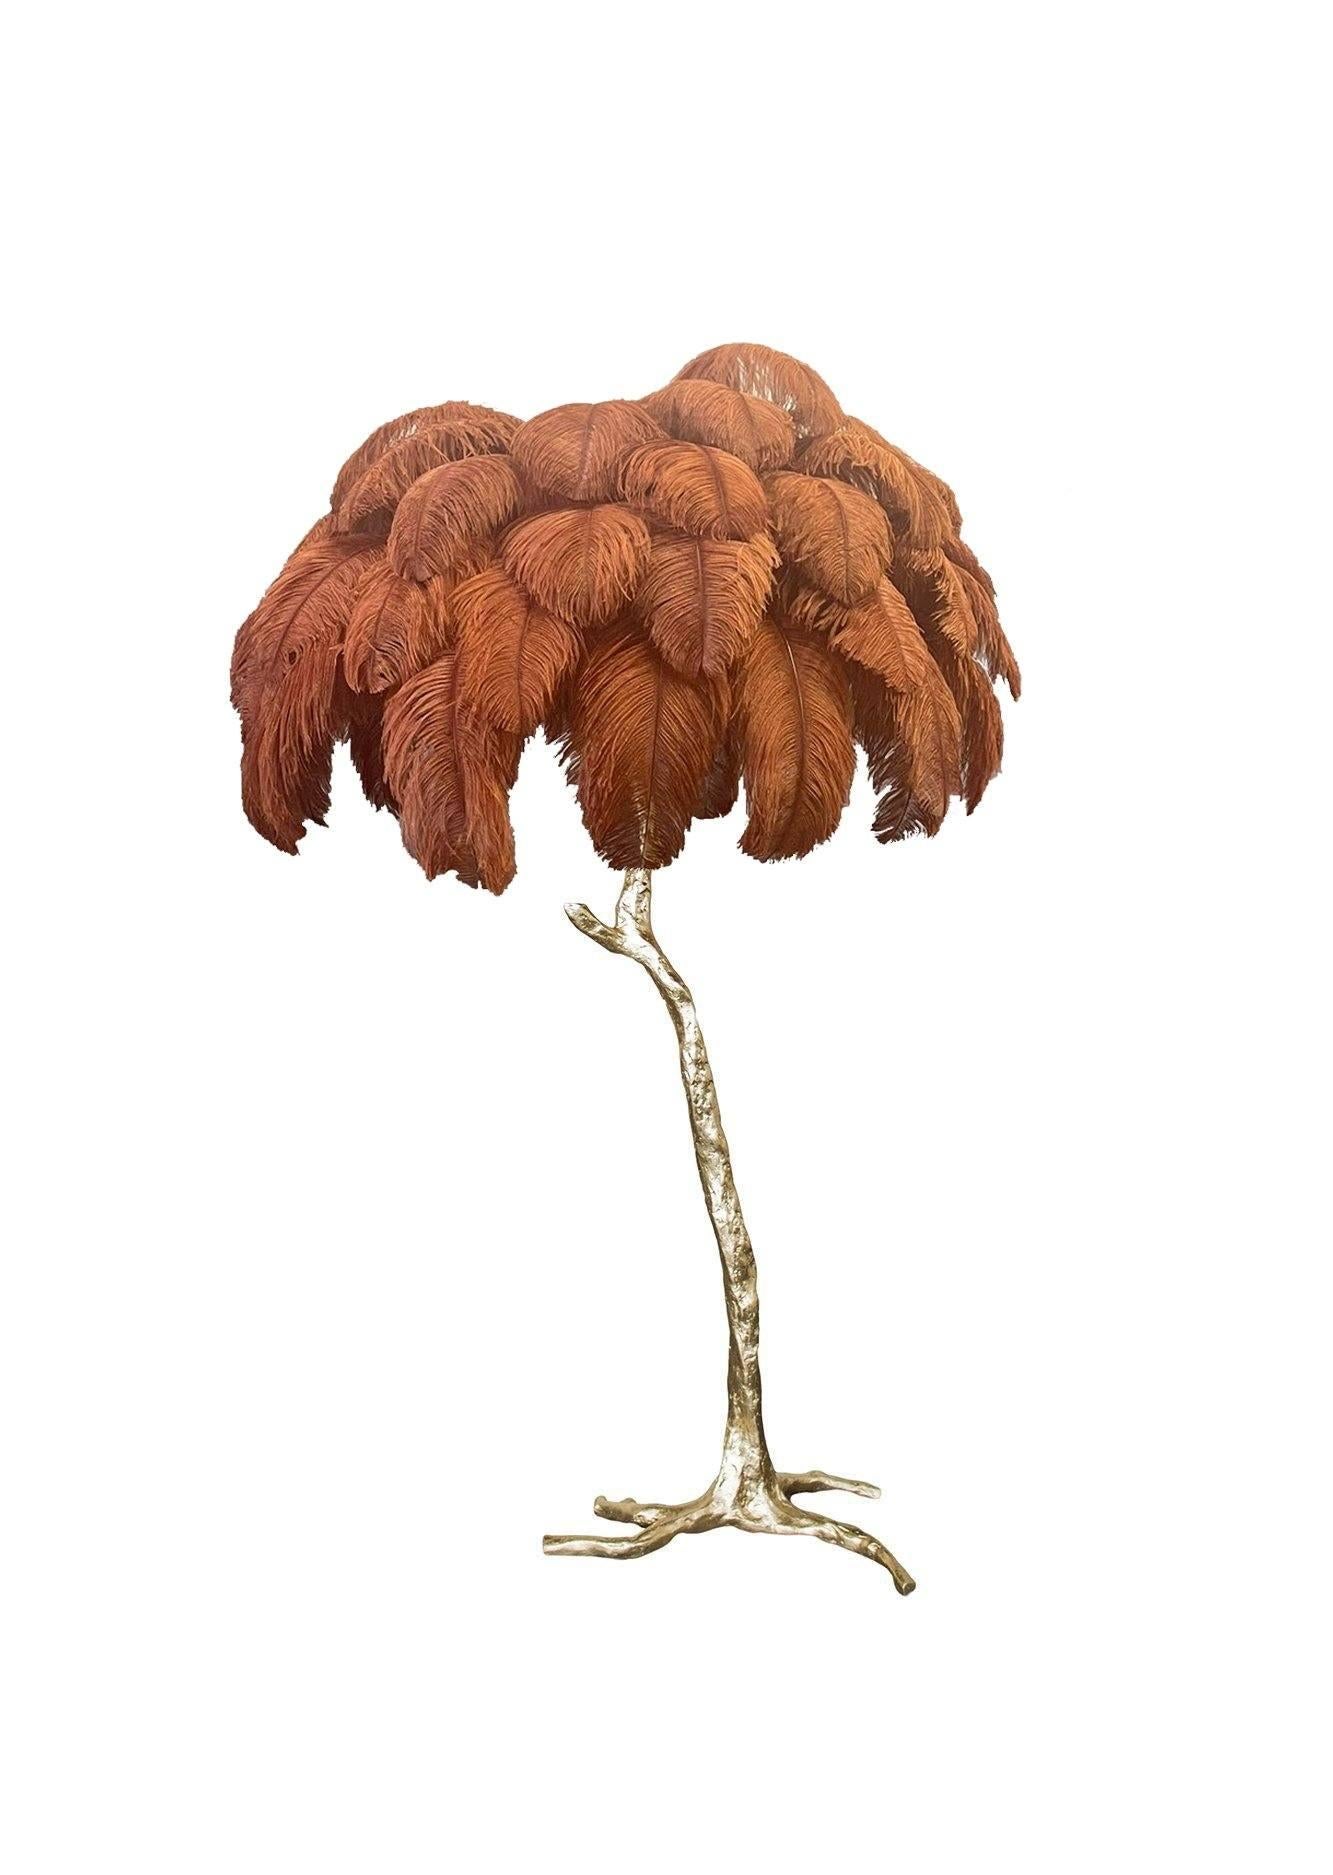 The Feather Floor Lamp, edition piece by A Modern Grand Tour.
An illuminating palm tree, resplendent with exquisite ostrich feather foliage, the feather floor lamp takes centre stage in any luxury setting and delivers the ultimate midas touch to